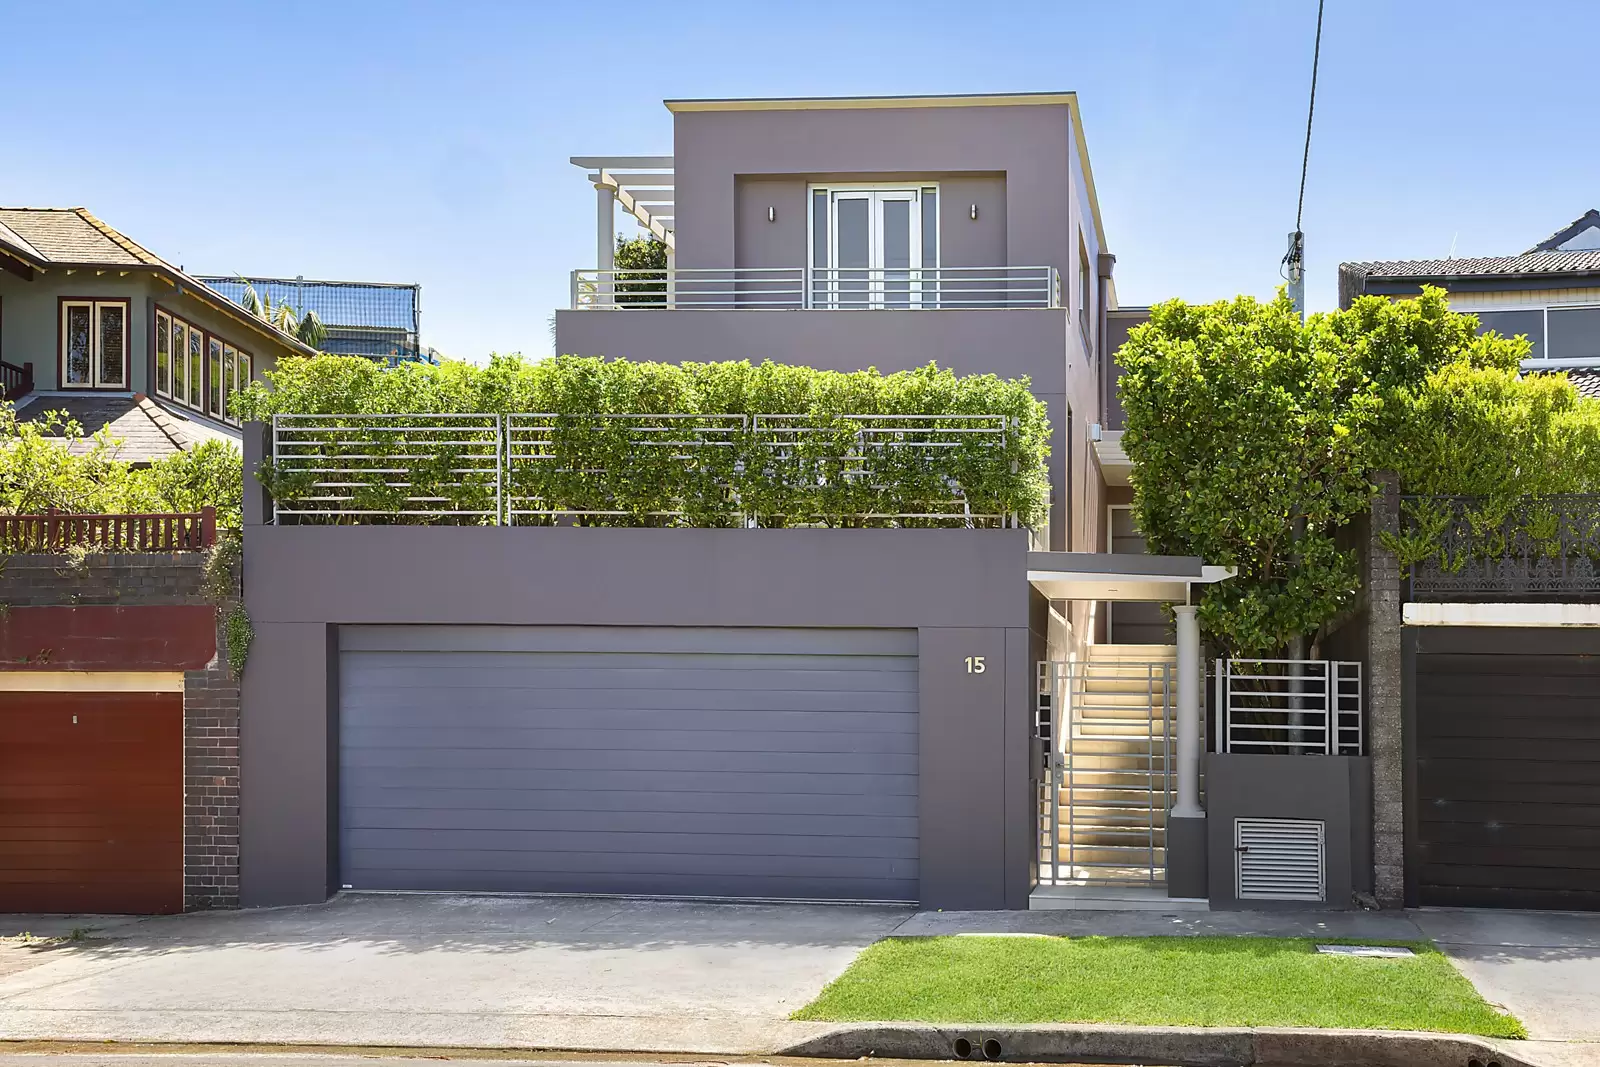 Photo #16: 15 Division Street, Coogee - Sold by Sydney Sotheby's International Realty